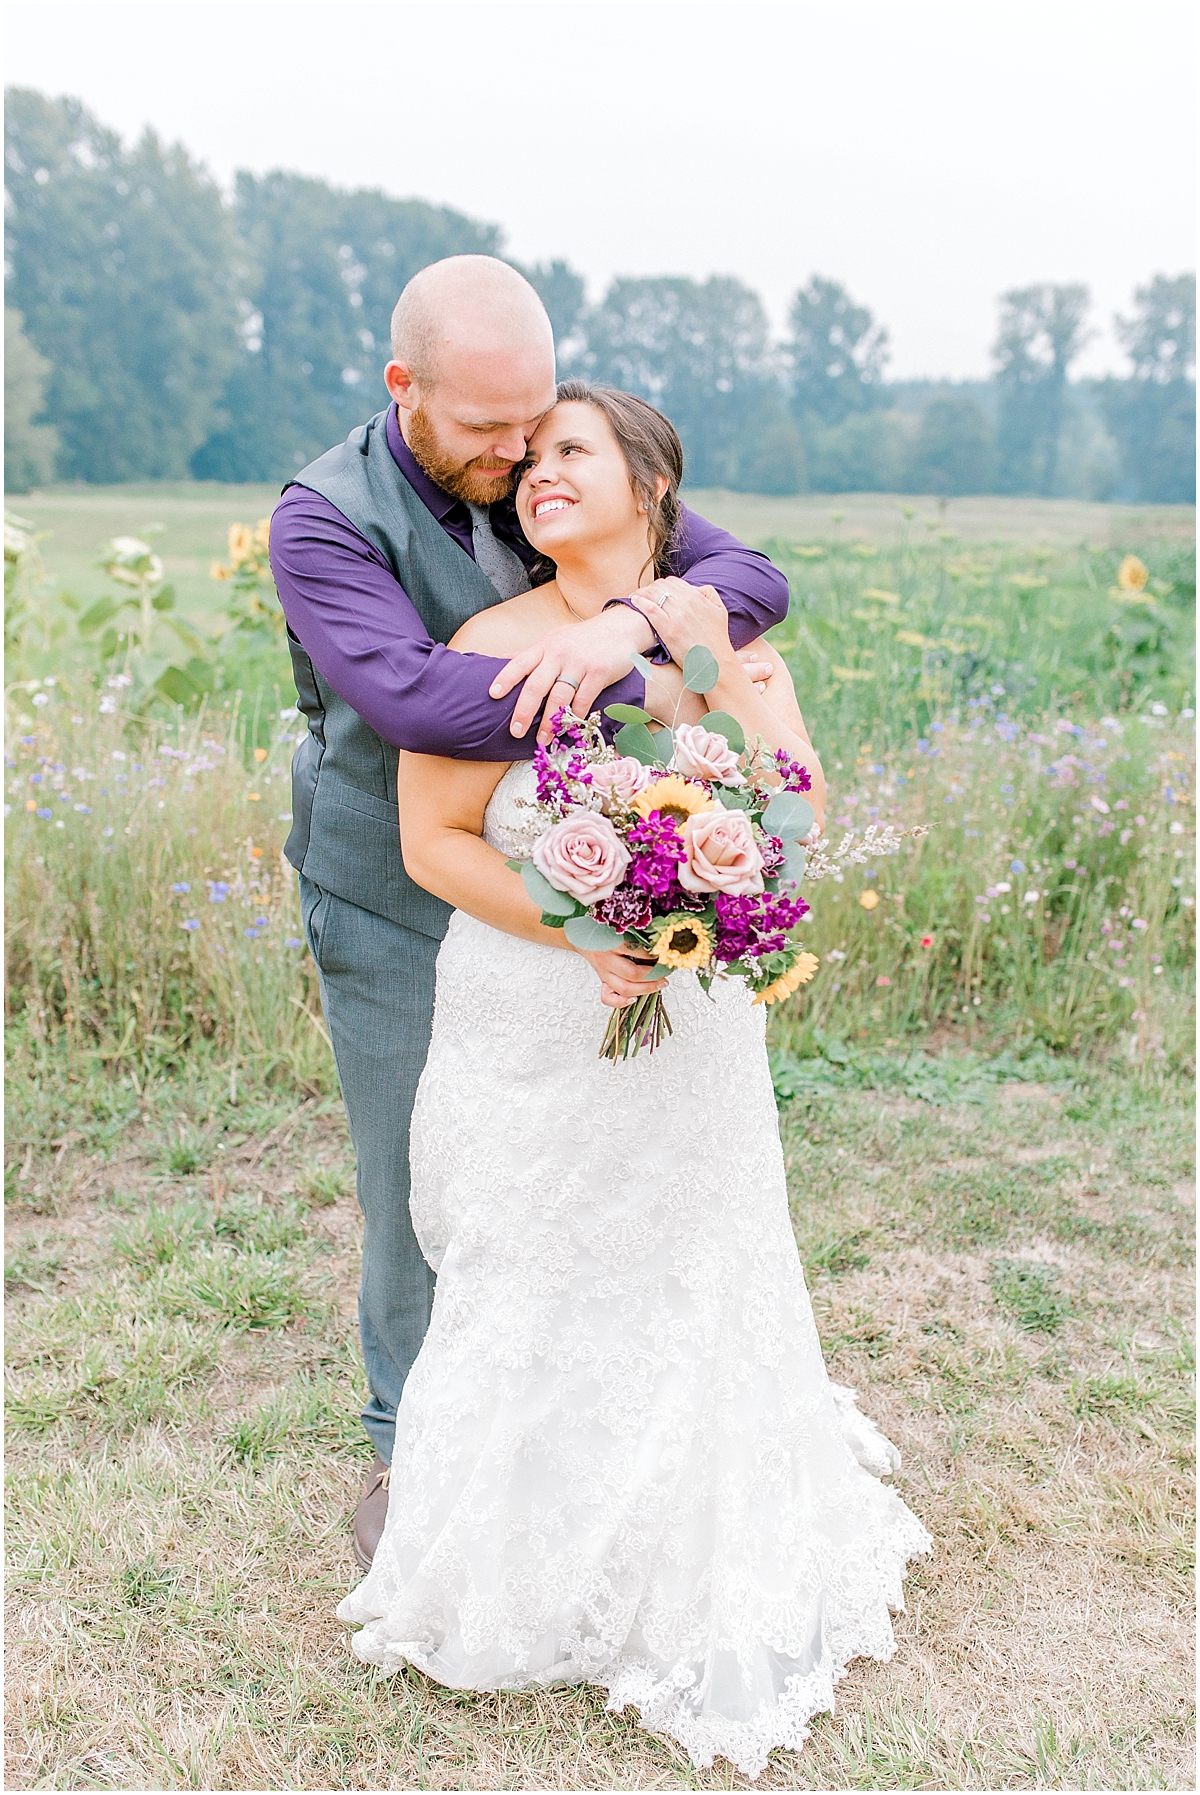 Sunflower themed wedding with purple accents, Emma Rose Company Seattle Wedding Photographer, Light and Airy photographer Kindred Presets Wedding Details PNW_0179.jpg